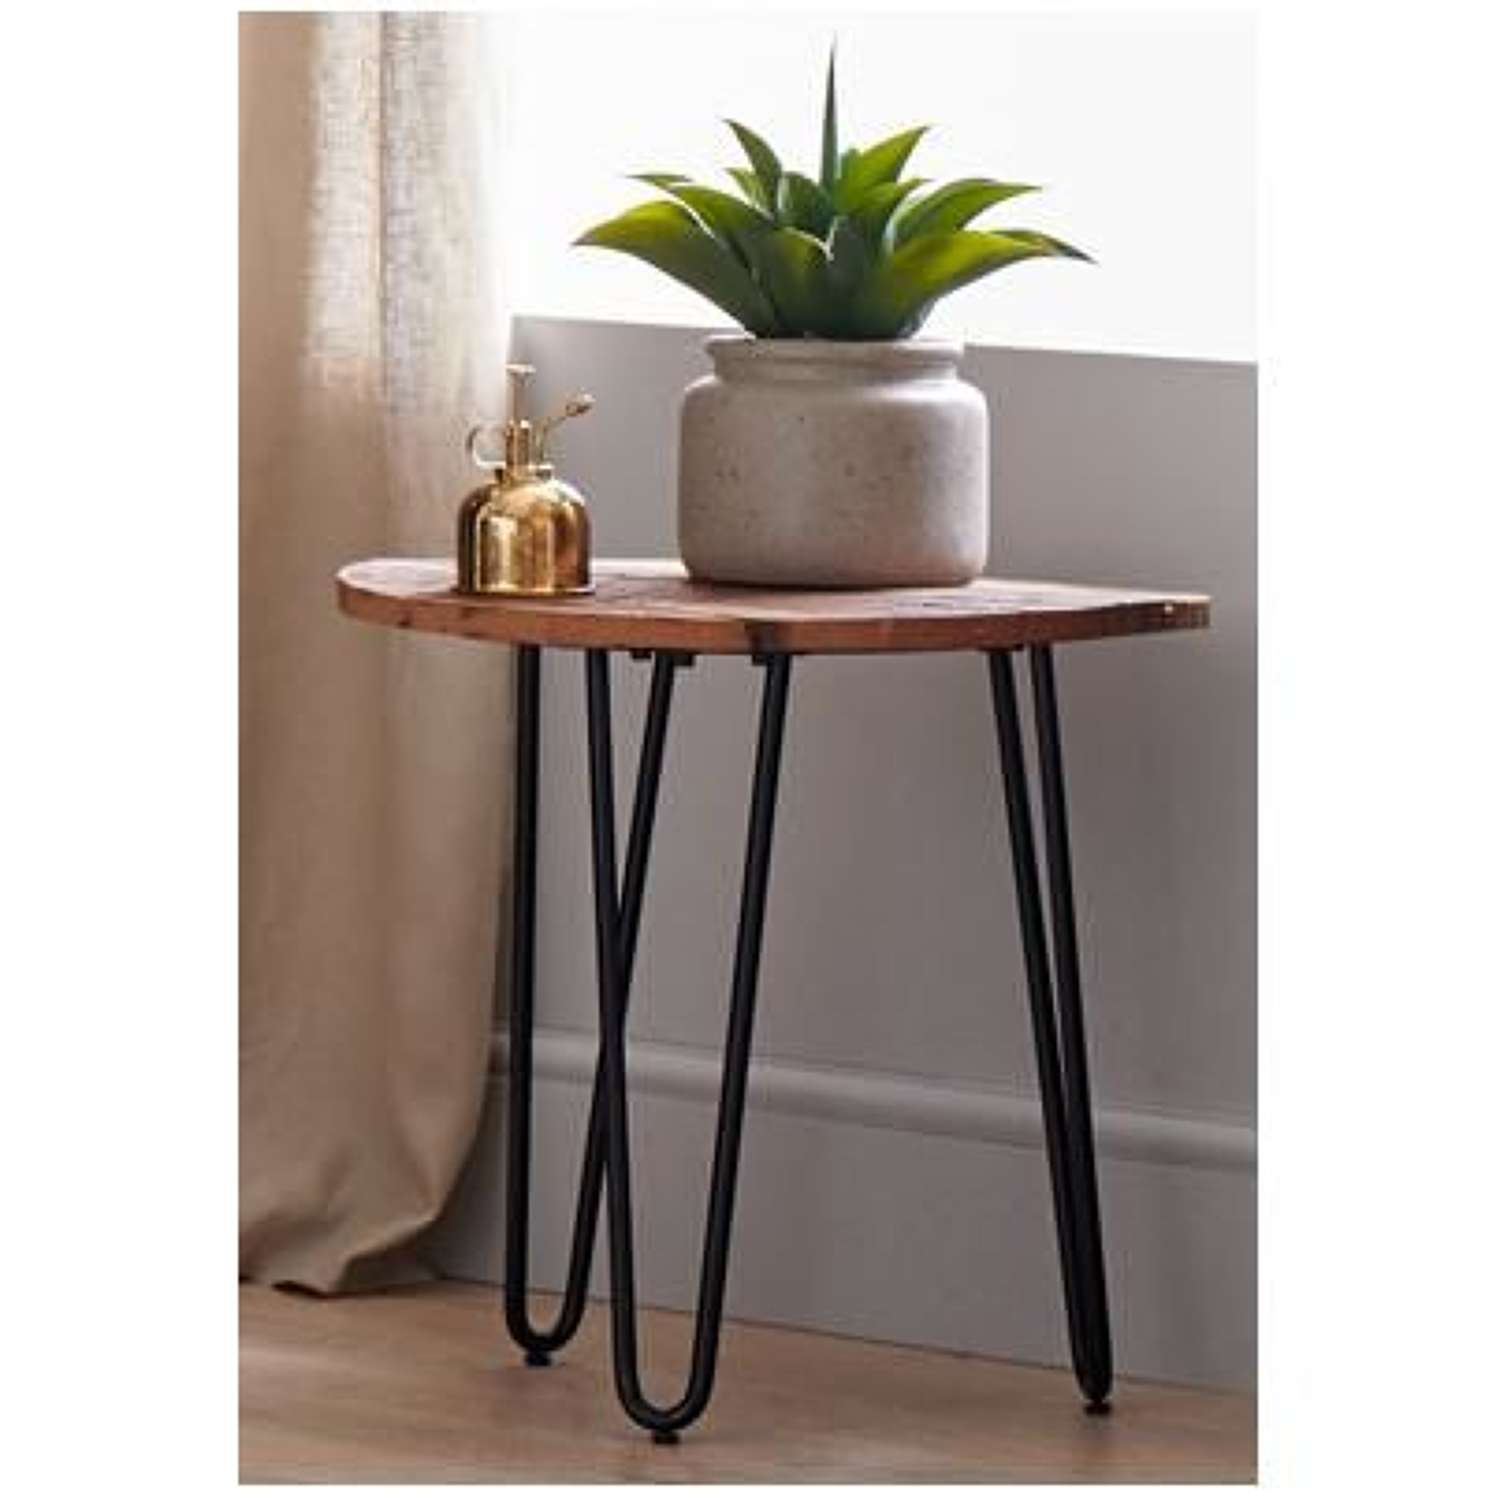 Tall reclaimed wood and metal side table